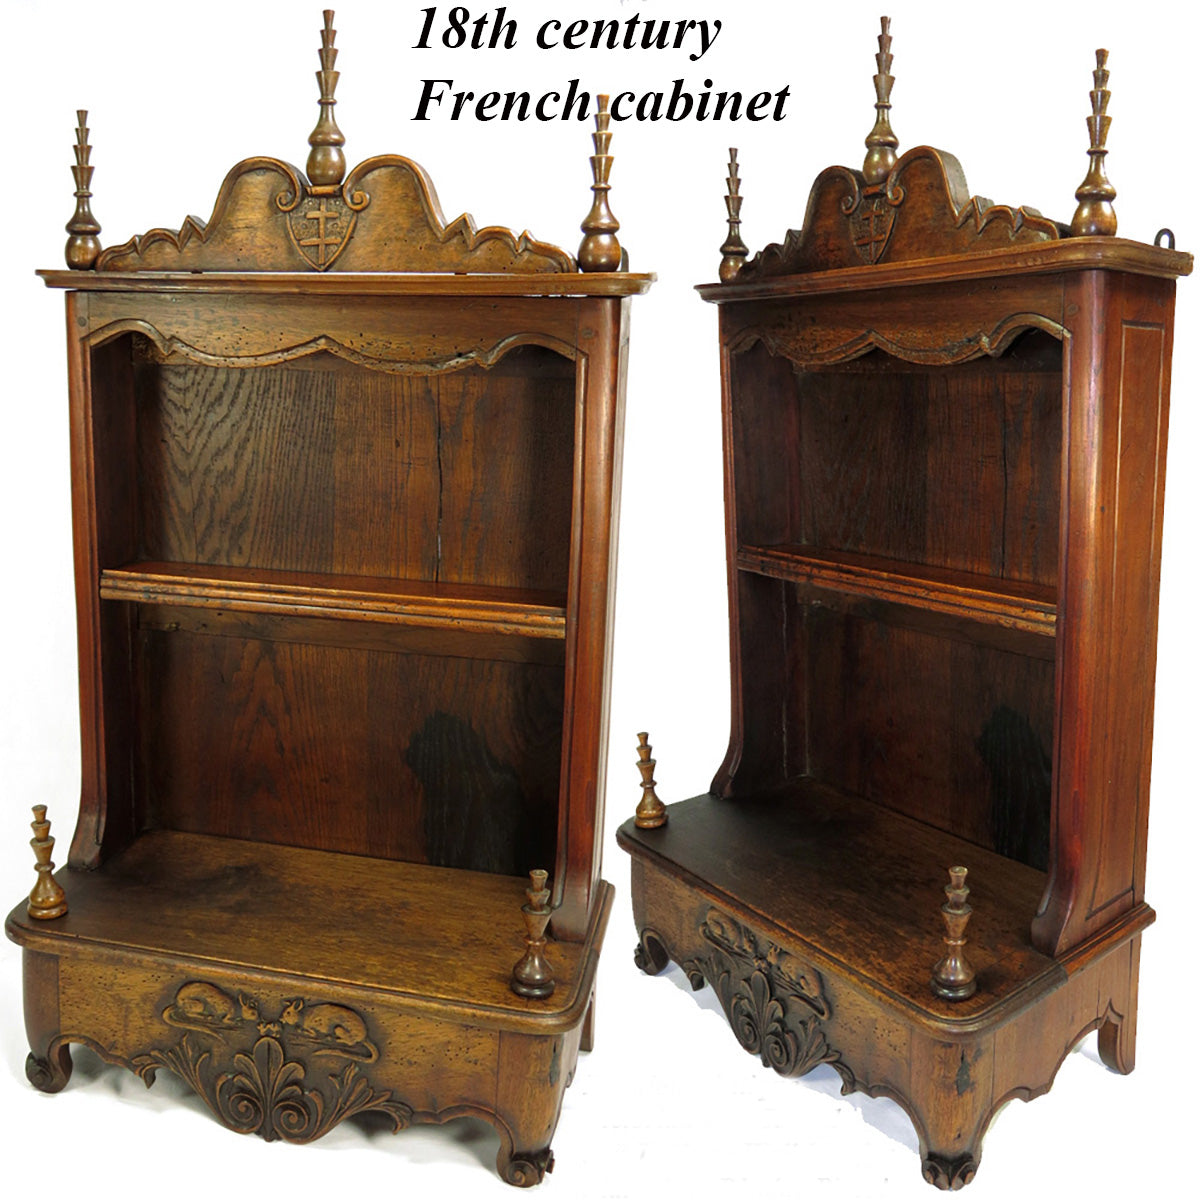 Very RARE Antique French c.1740-1800 Era 31" Carved Wood Estanier Wall Cabinet or Table Vitrine, Shelf